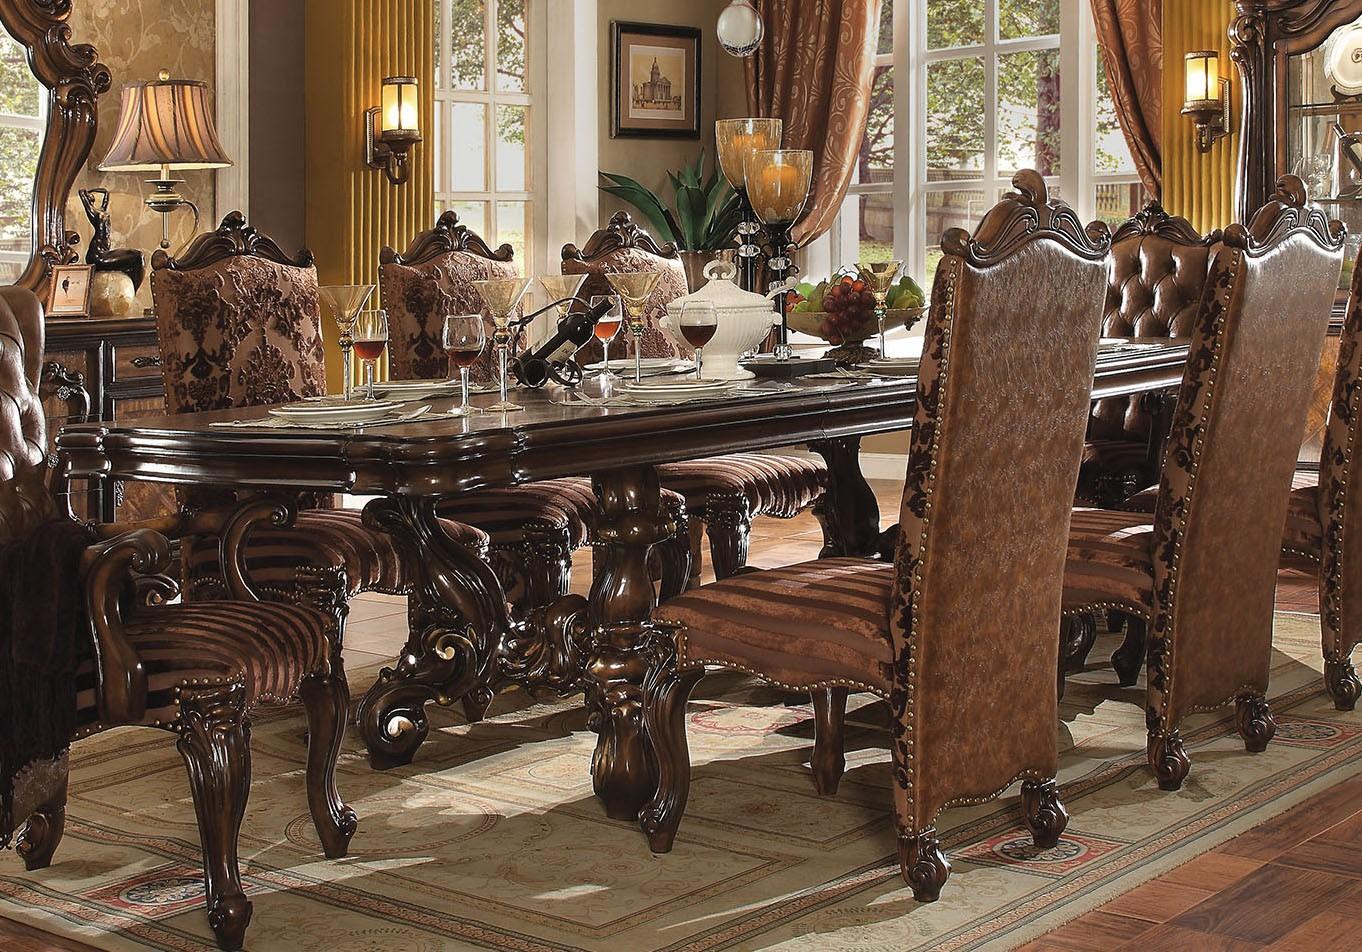 Classic, Traditional Dining Table Set 61100 Versailles 61100-Versailles-Set-5 in Cherry Polyurethane